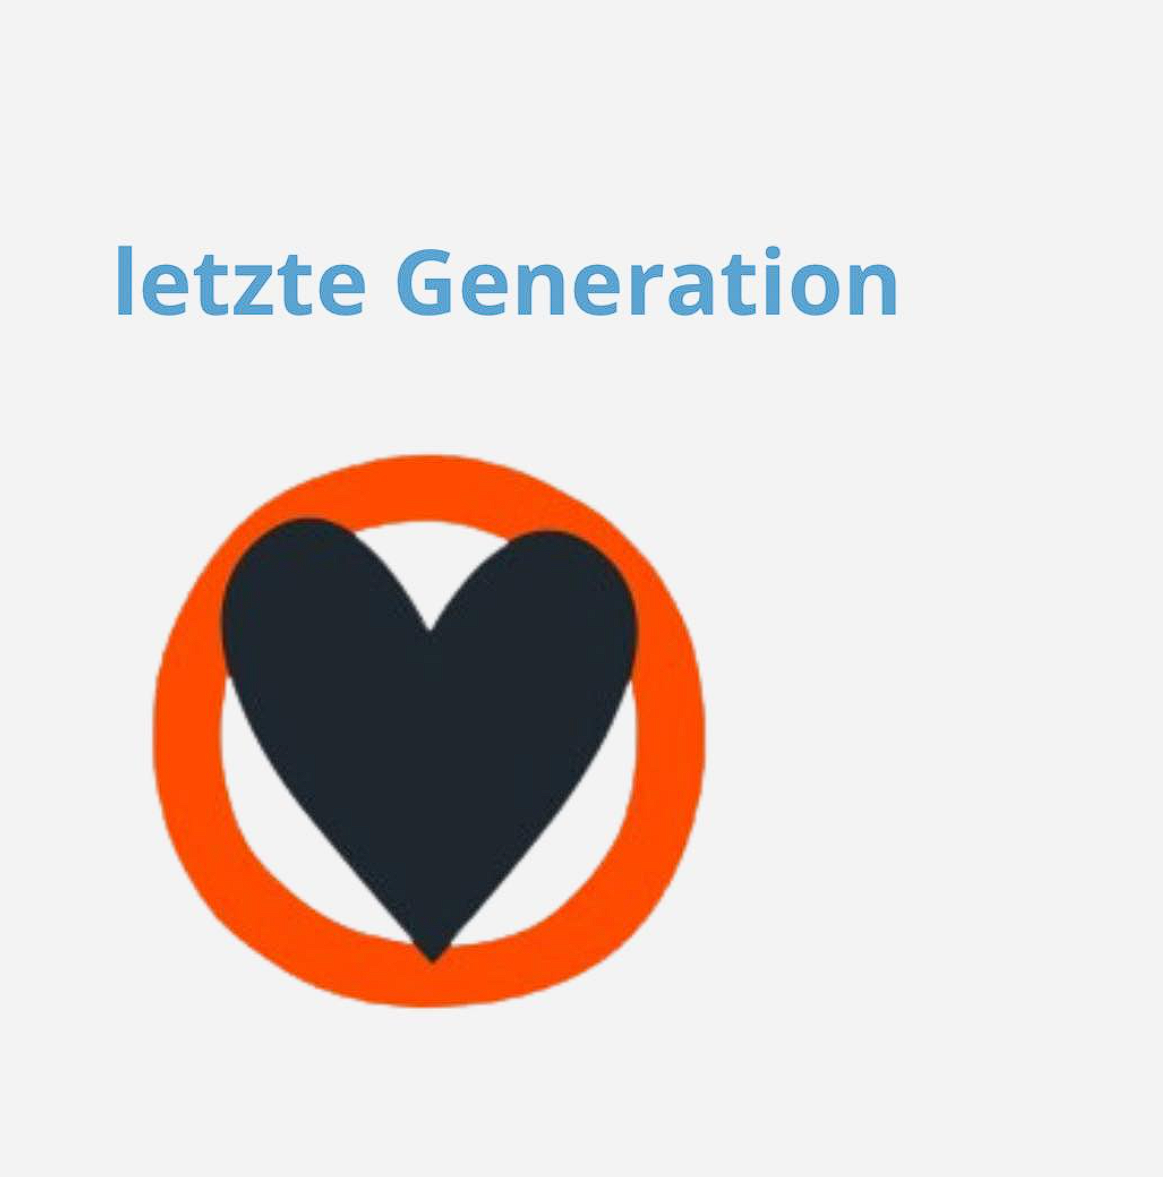 You are currently viewing Die letzte Generation